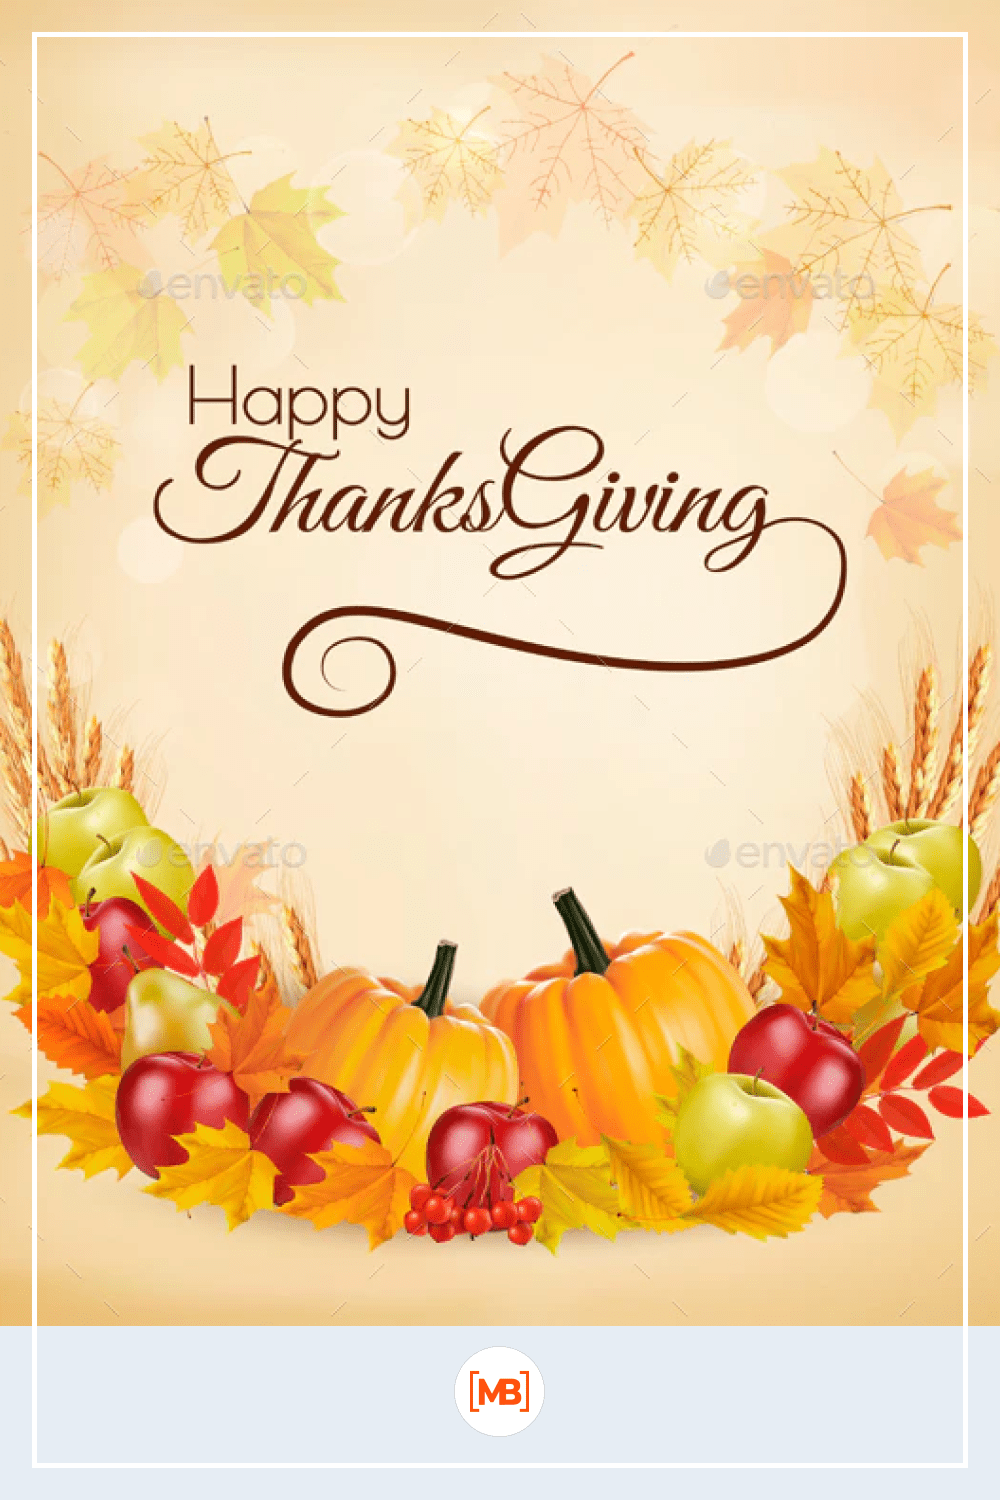 Happy Thanksgiving background with colorful autumn leaves.